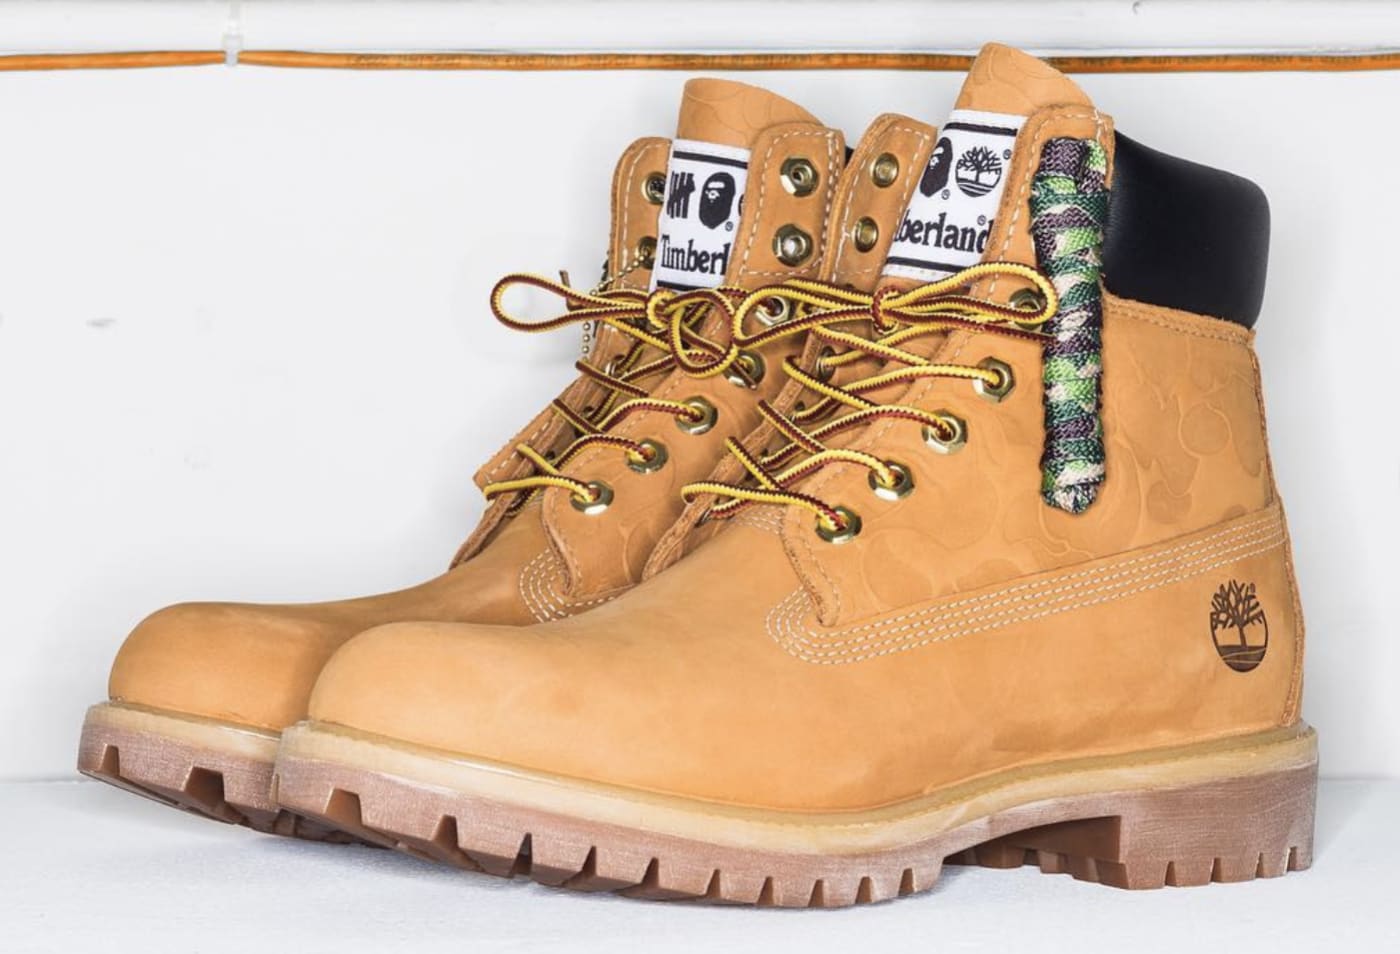 Undefeated and Bape Put Their Spin on the Timberland 6″ Boot | Complex